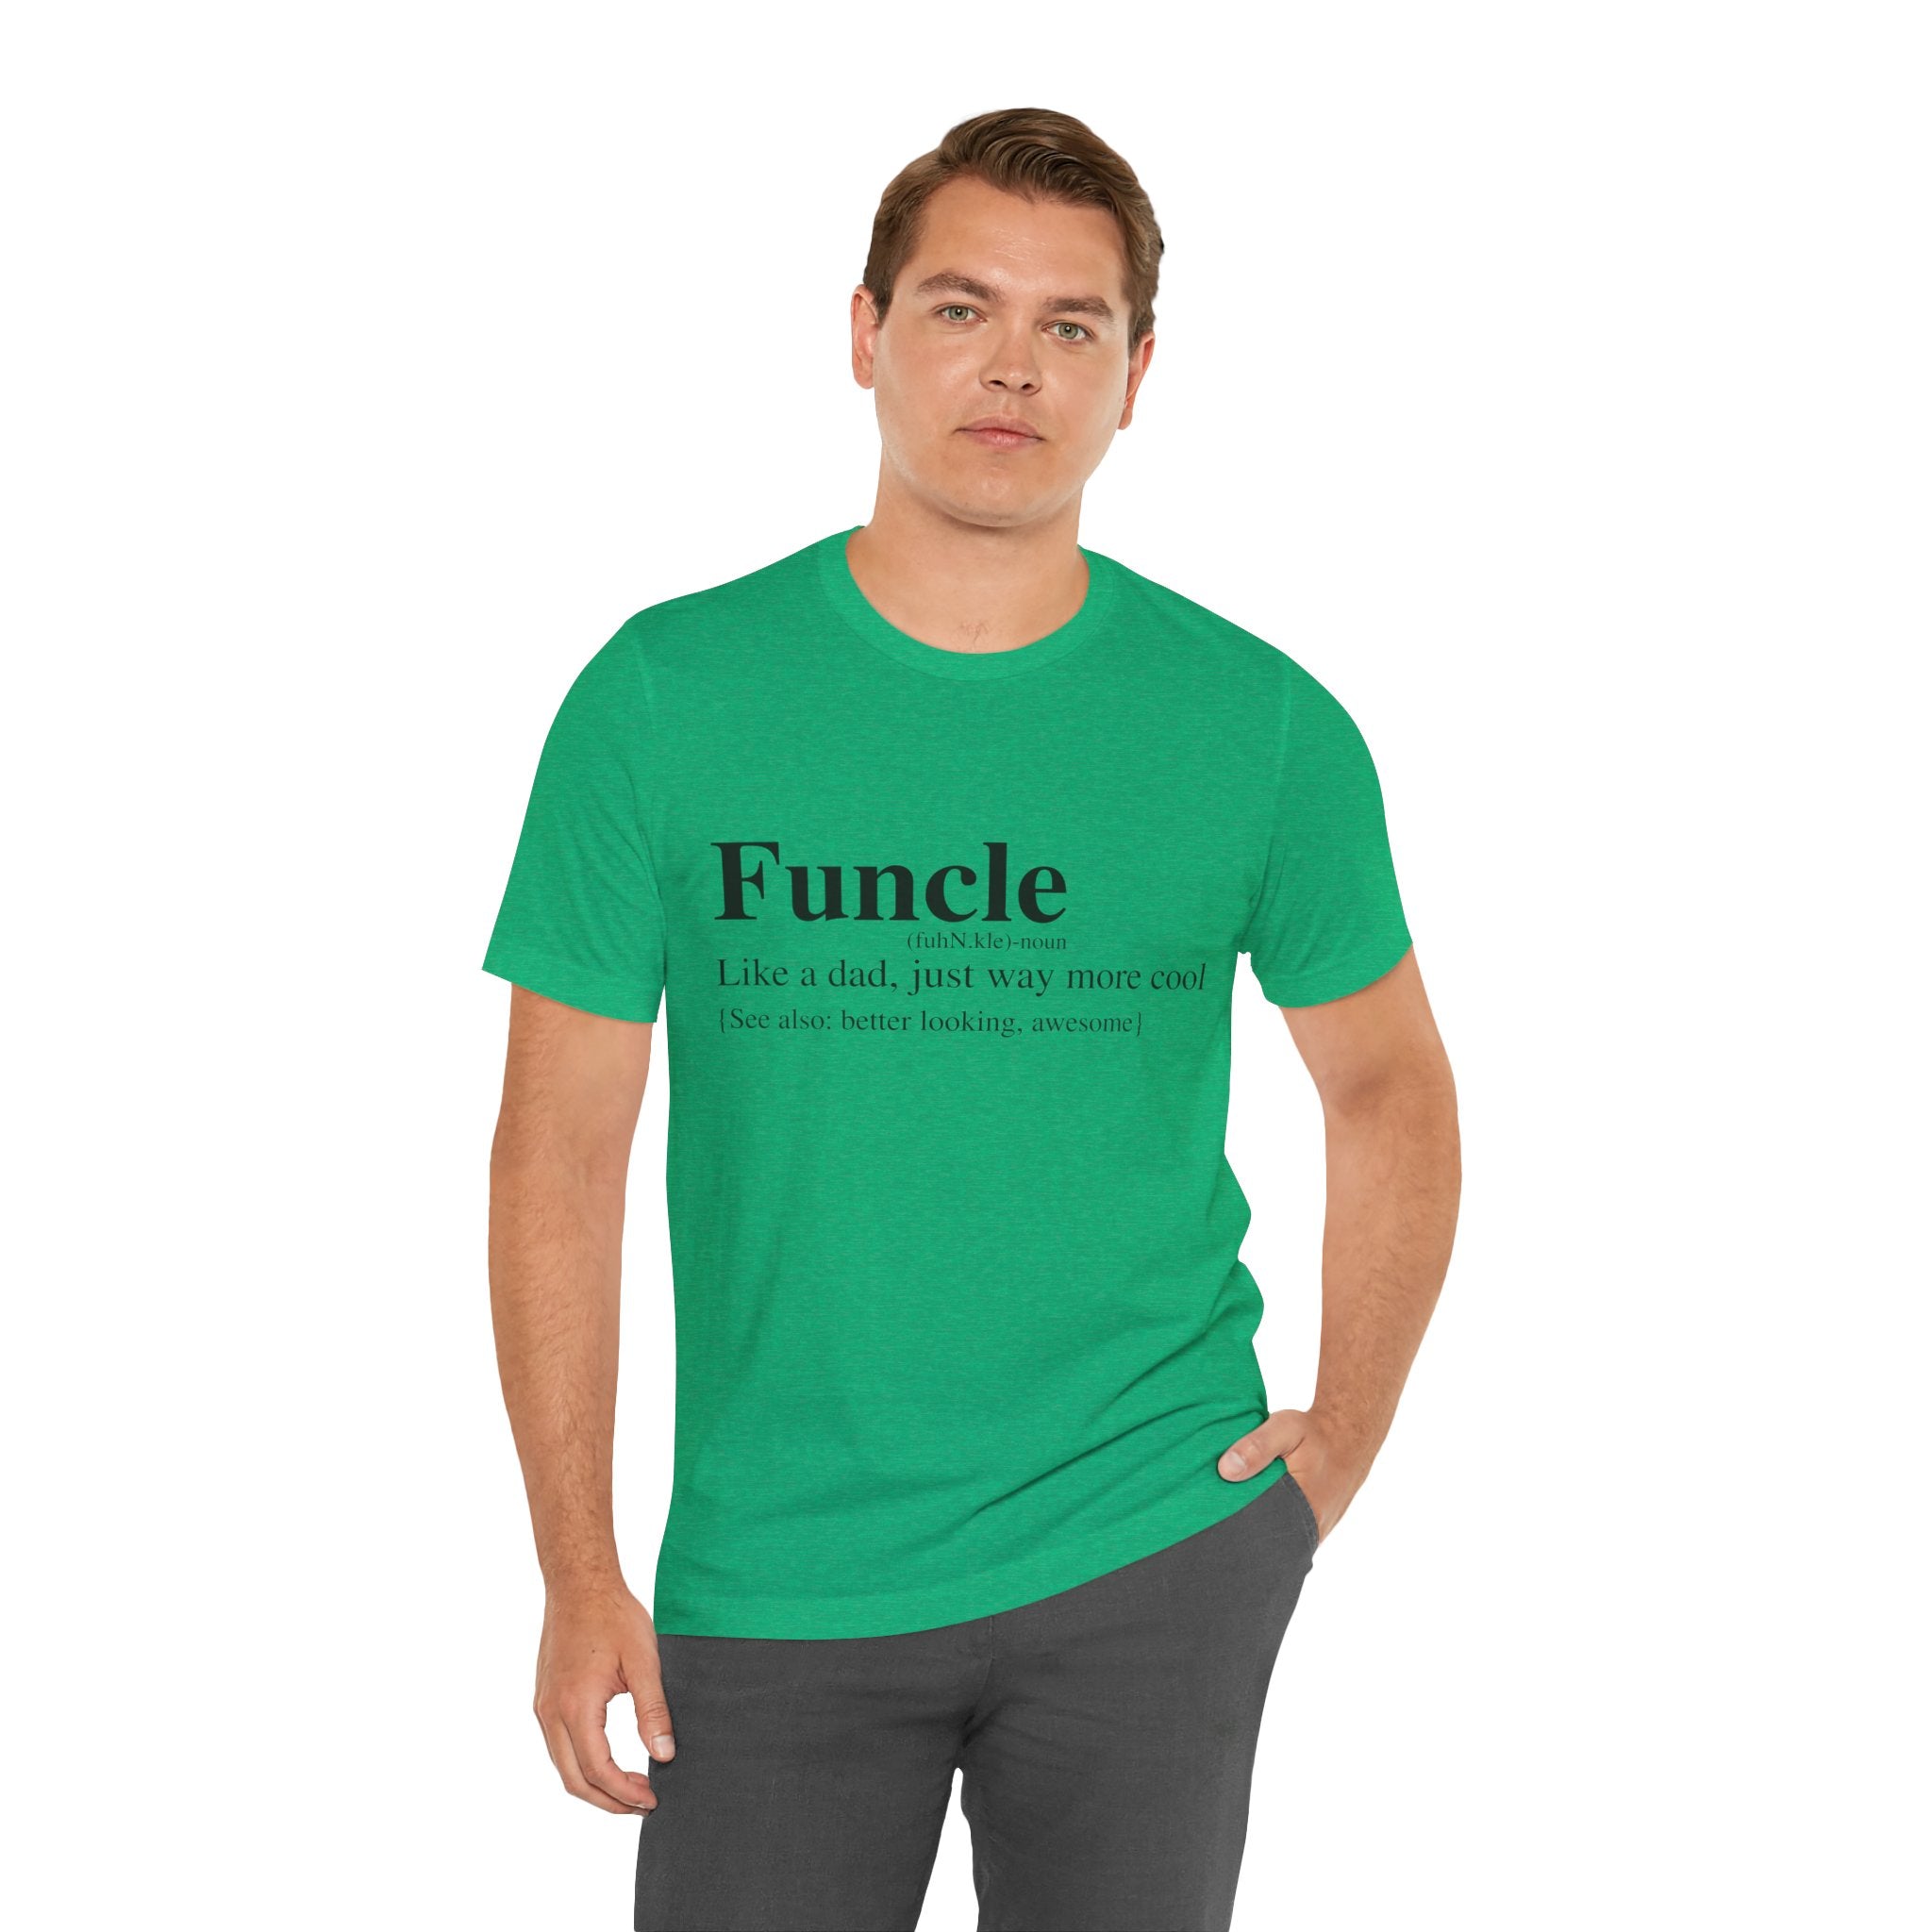 Man in green Funcle T-Shirt labeled "Funcle" standing with one hand on his hip, looking at the camera.